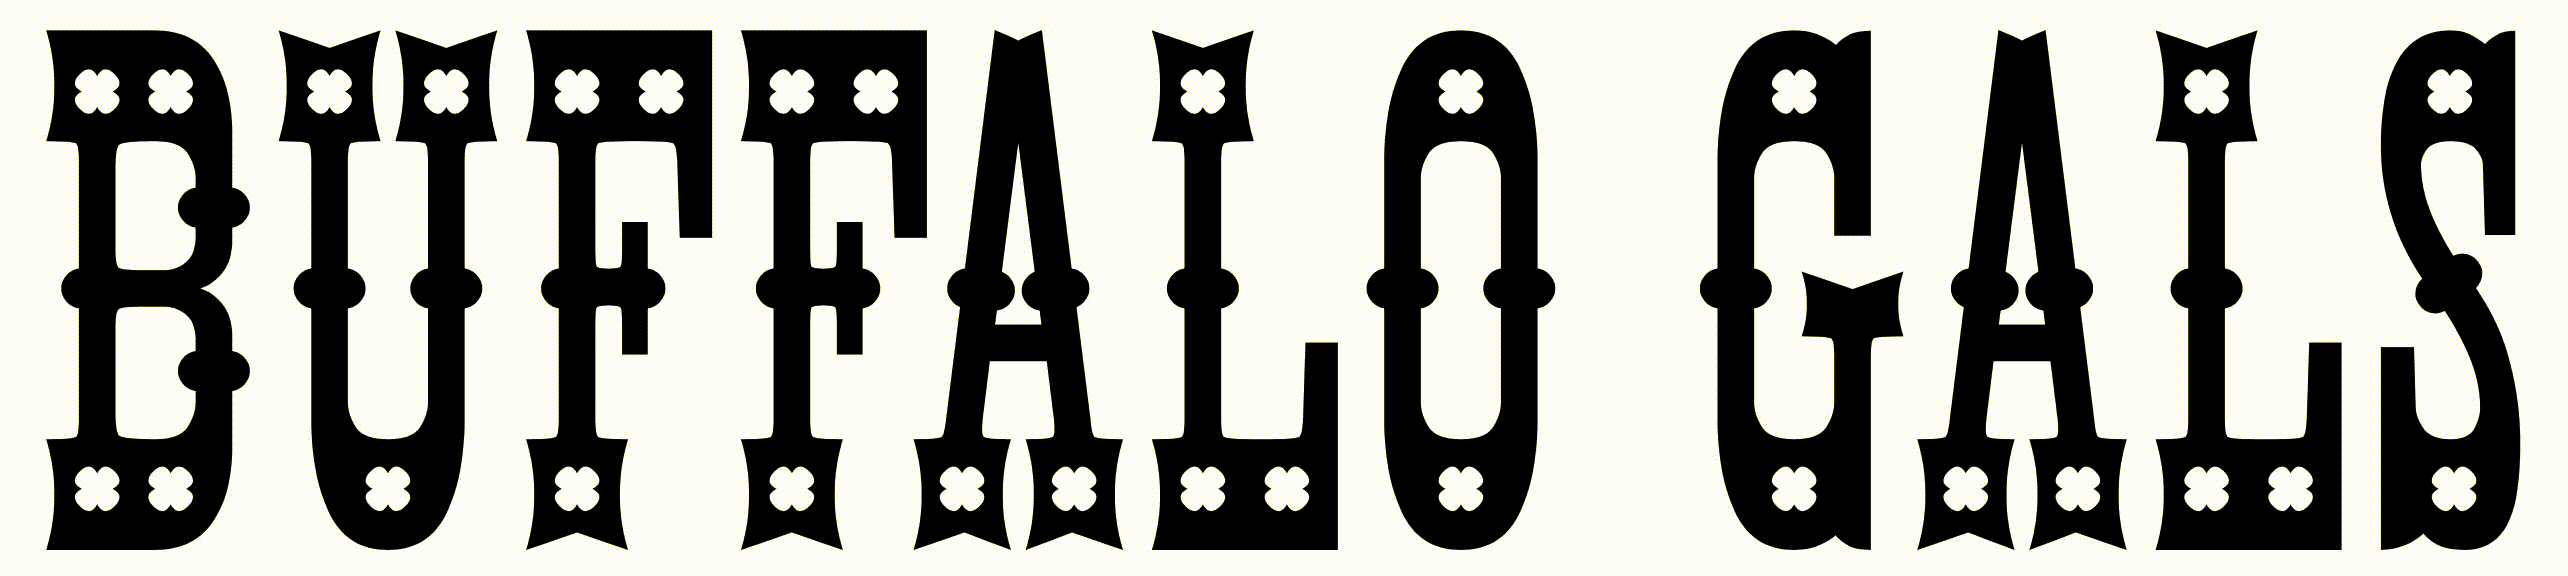 The words 'buffalo gals' in a Western typeface with bulletholes animating in shape